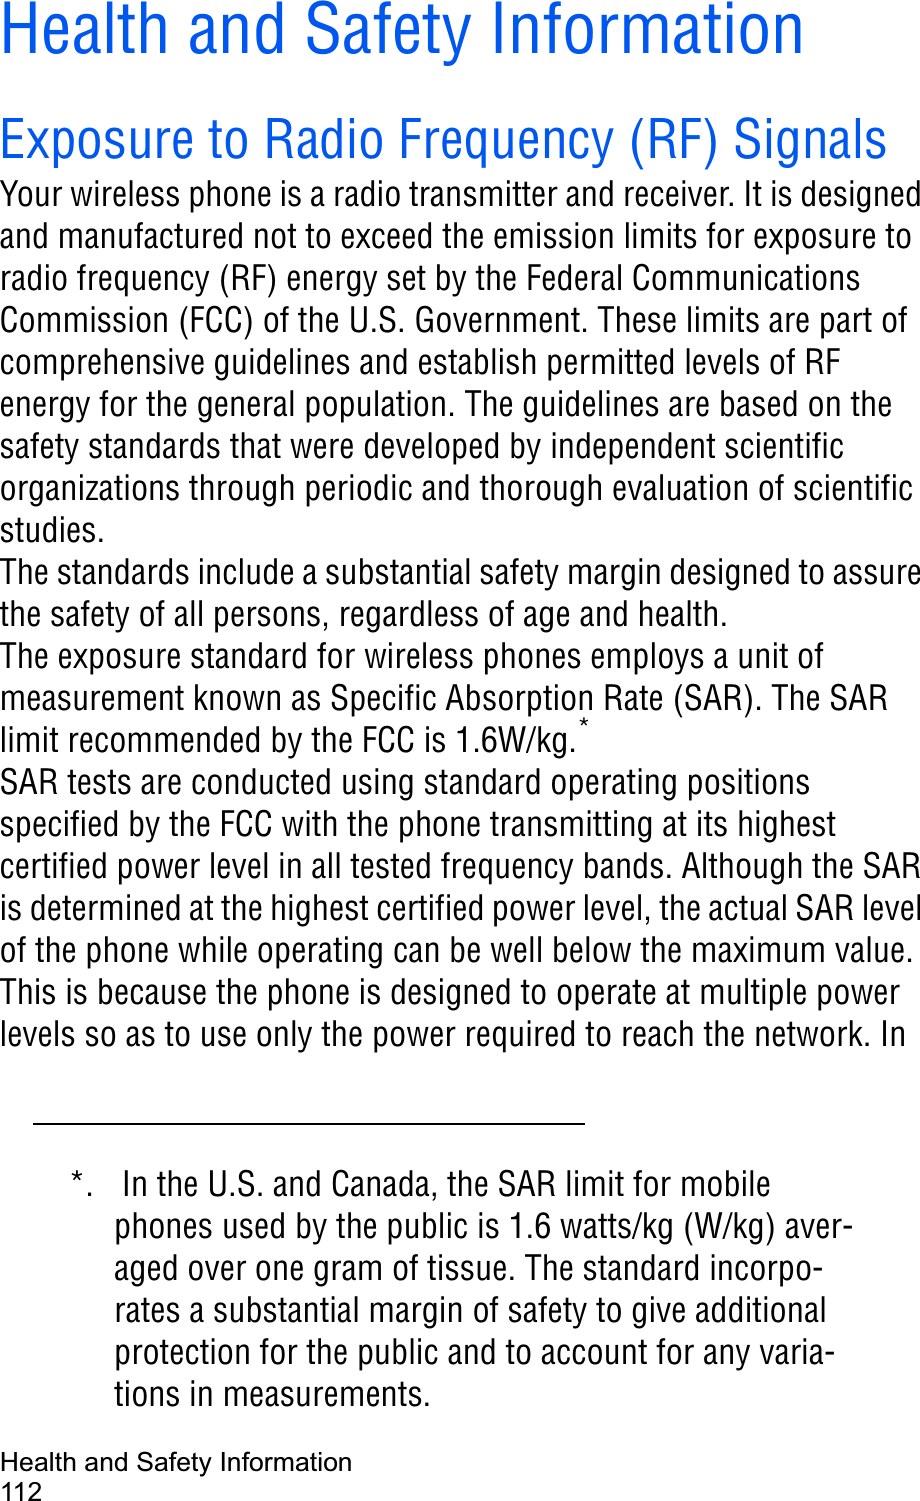 Health and Safety Information112Health and Safety InformationExposure to Radio Frequency (RF) SignalsYour wireless phone is a radio transmitter and receiver. It is designed and manufactured not to exceed the emission limits for exposure to radio frequency (RF) energy set by the Federal Communications Commission (FCC) of the U.S. Government. These limits are part of comprehensive guidelines and establish permitted levels of RF energy for the general population. The guidelines are based on the safety standards that were developed by independent scientific organizations through periodic and thorough evaluation of scientific studies.The standards include a substantial safety margin designed to assure the safety of all persons, regardless of age and health.The exposure standard for wireless phones employs a unit of measurement known as Specific Absorption Rate (SAR). The SAR limit recommended by the FCC is 1.6W/kg.*SAR tests are conducted using standard operating positions specified by the FCC with the phone transmitting at its highest certified power level in all tested frequency bands. Although the SAR is determined at the highest certified power level, the actual SAR level of the phone while operating can be well below the maximum value. This is because the phone is designed to operate at multiple power levels so as to use only the power required to reach the network. In *. In the U.S. and Canada, the SAR limit for mobile phones used by the public is 1.6 watts/kg (W/kg) aver-aged over one gram of tissue. The standard incorpo-rates a substantial margin of safety to give additional protection for the public and to account for any varia-tions in measurements.